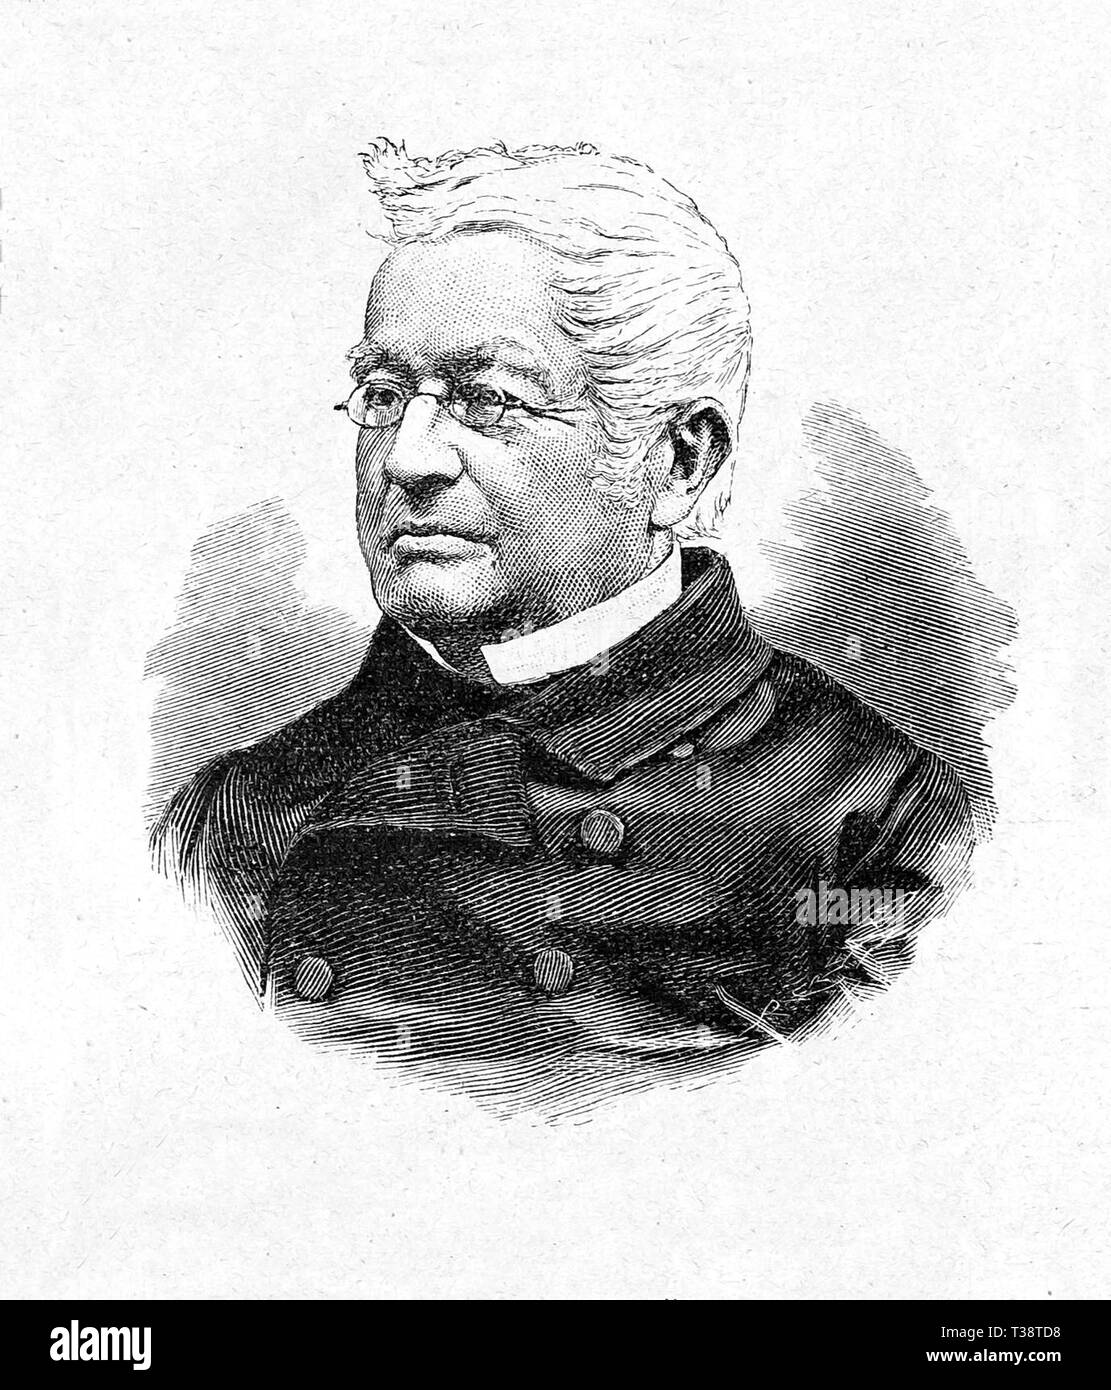 Adolphe Thiers, President of the French Republic. Digital improved reproduction from Illustrated overview of the life of mankind in the 19th century, 1901 edition, Marx publishing house, St. Petersburg. Stock Photo